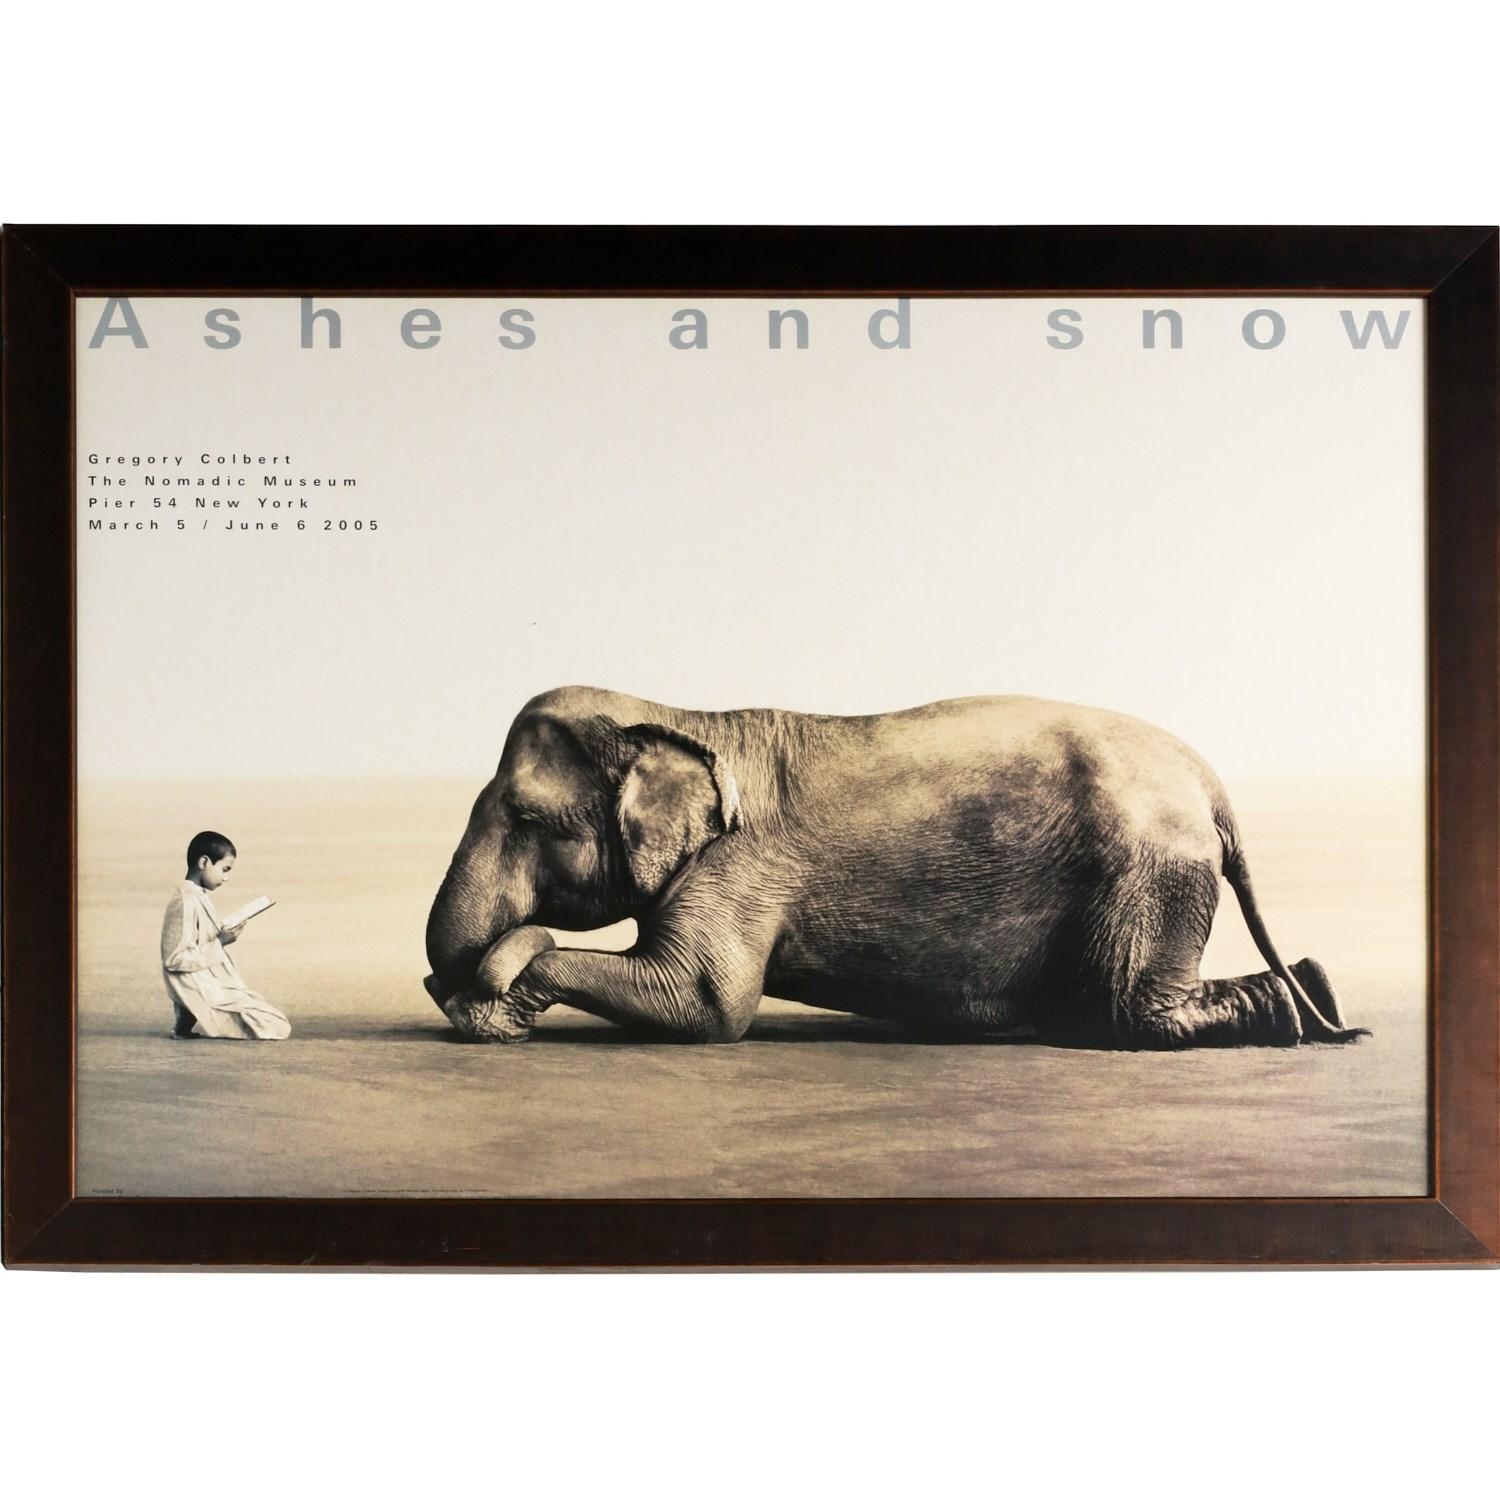 Artwork by Gregory Colbert, Ashes and Snow, Made of exhibition poster